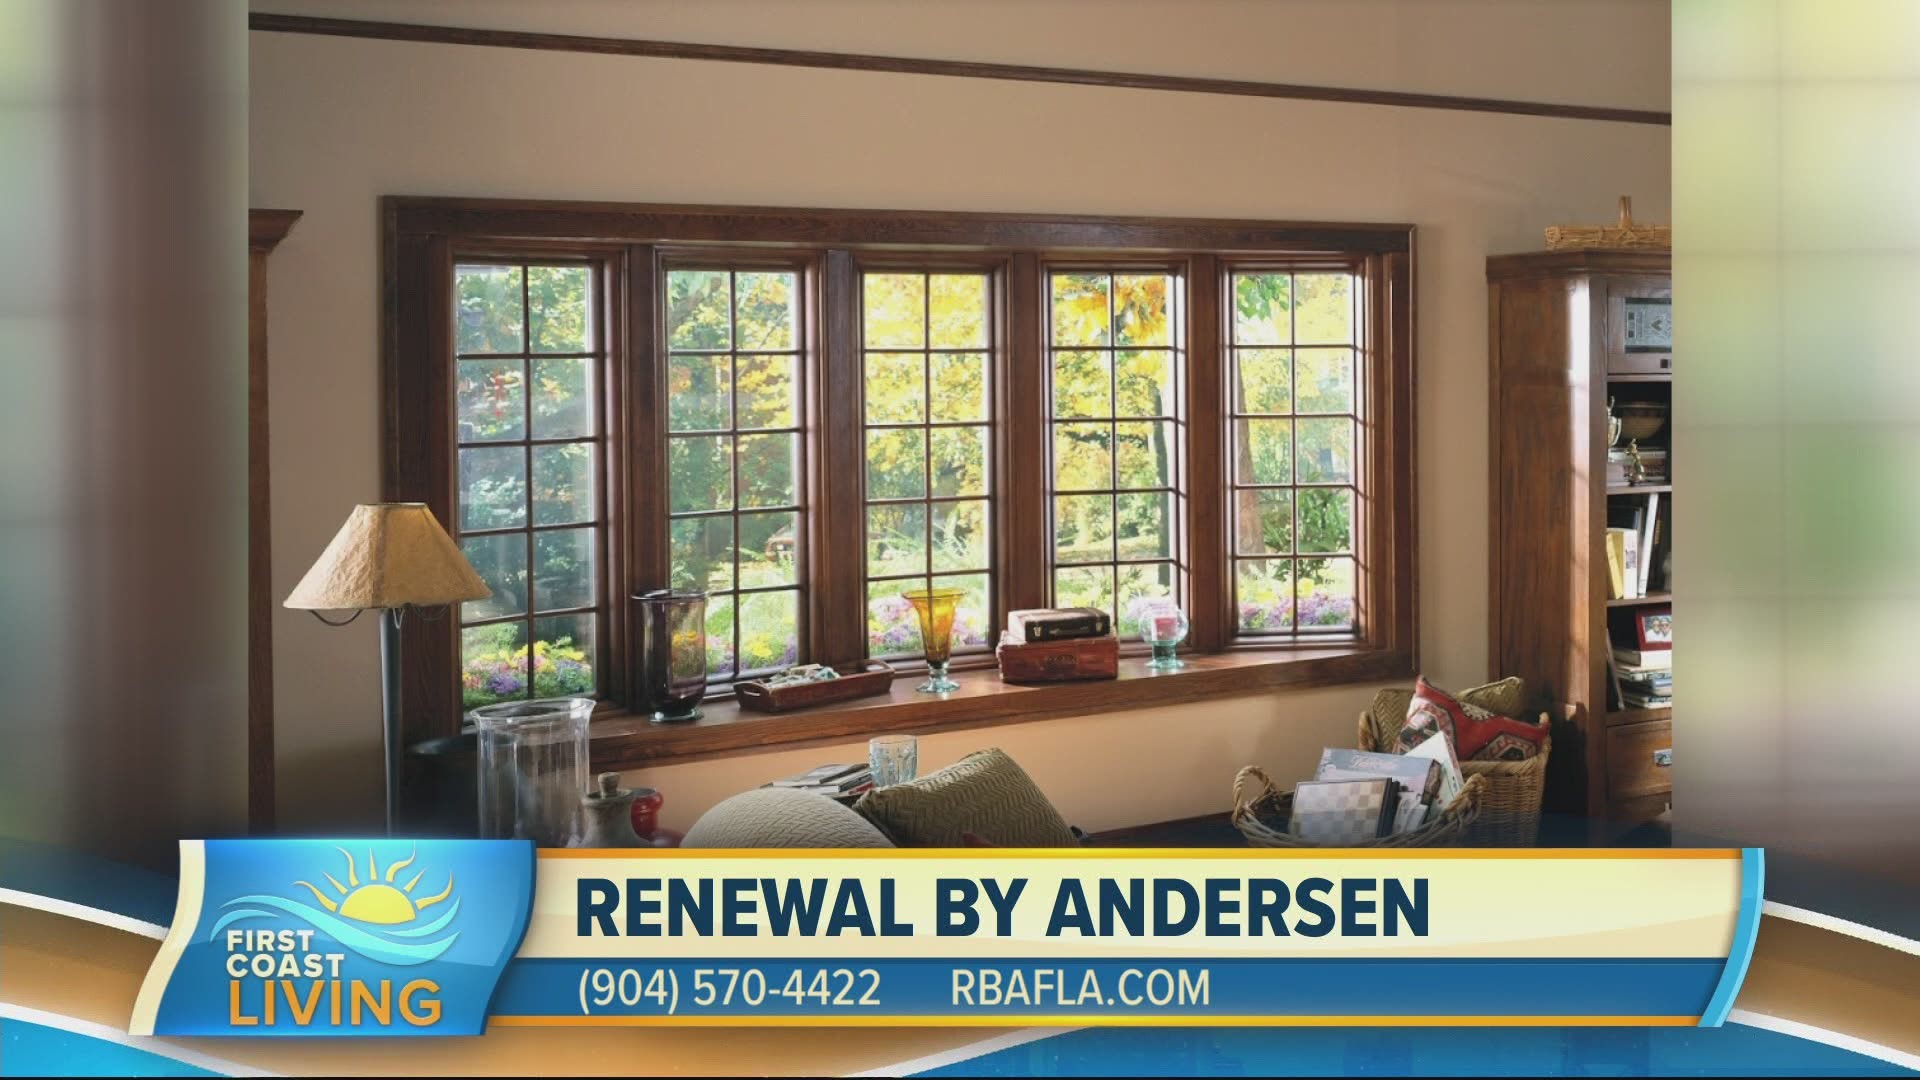 Improve your home's appearance and energy efficiency with the help of Renewal By Andersen.